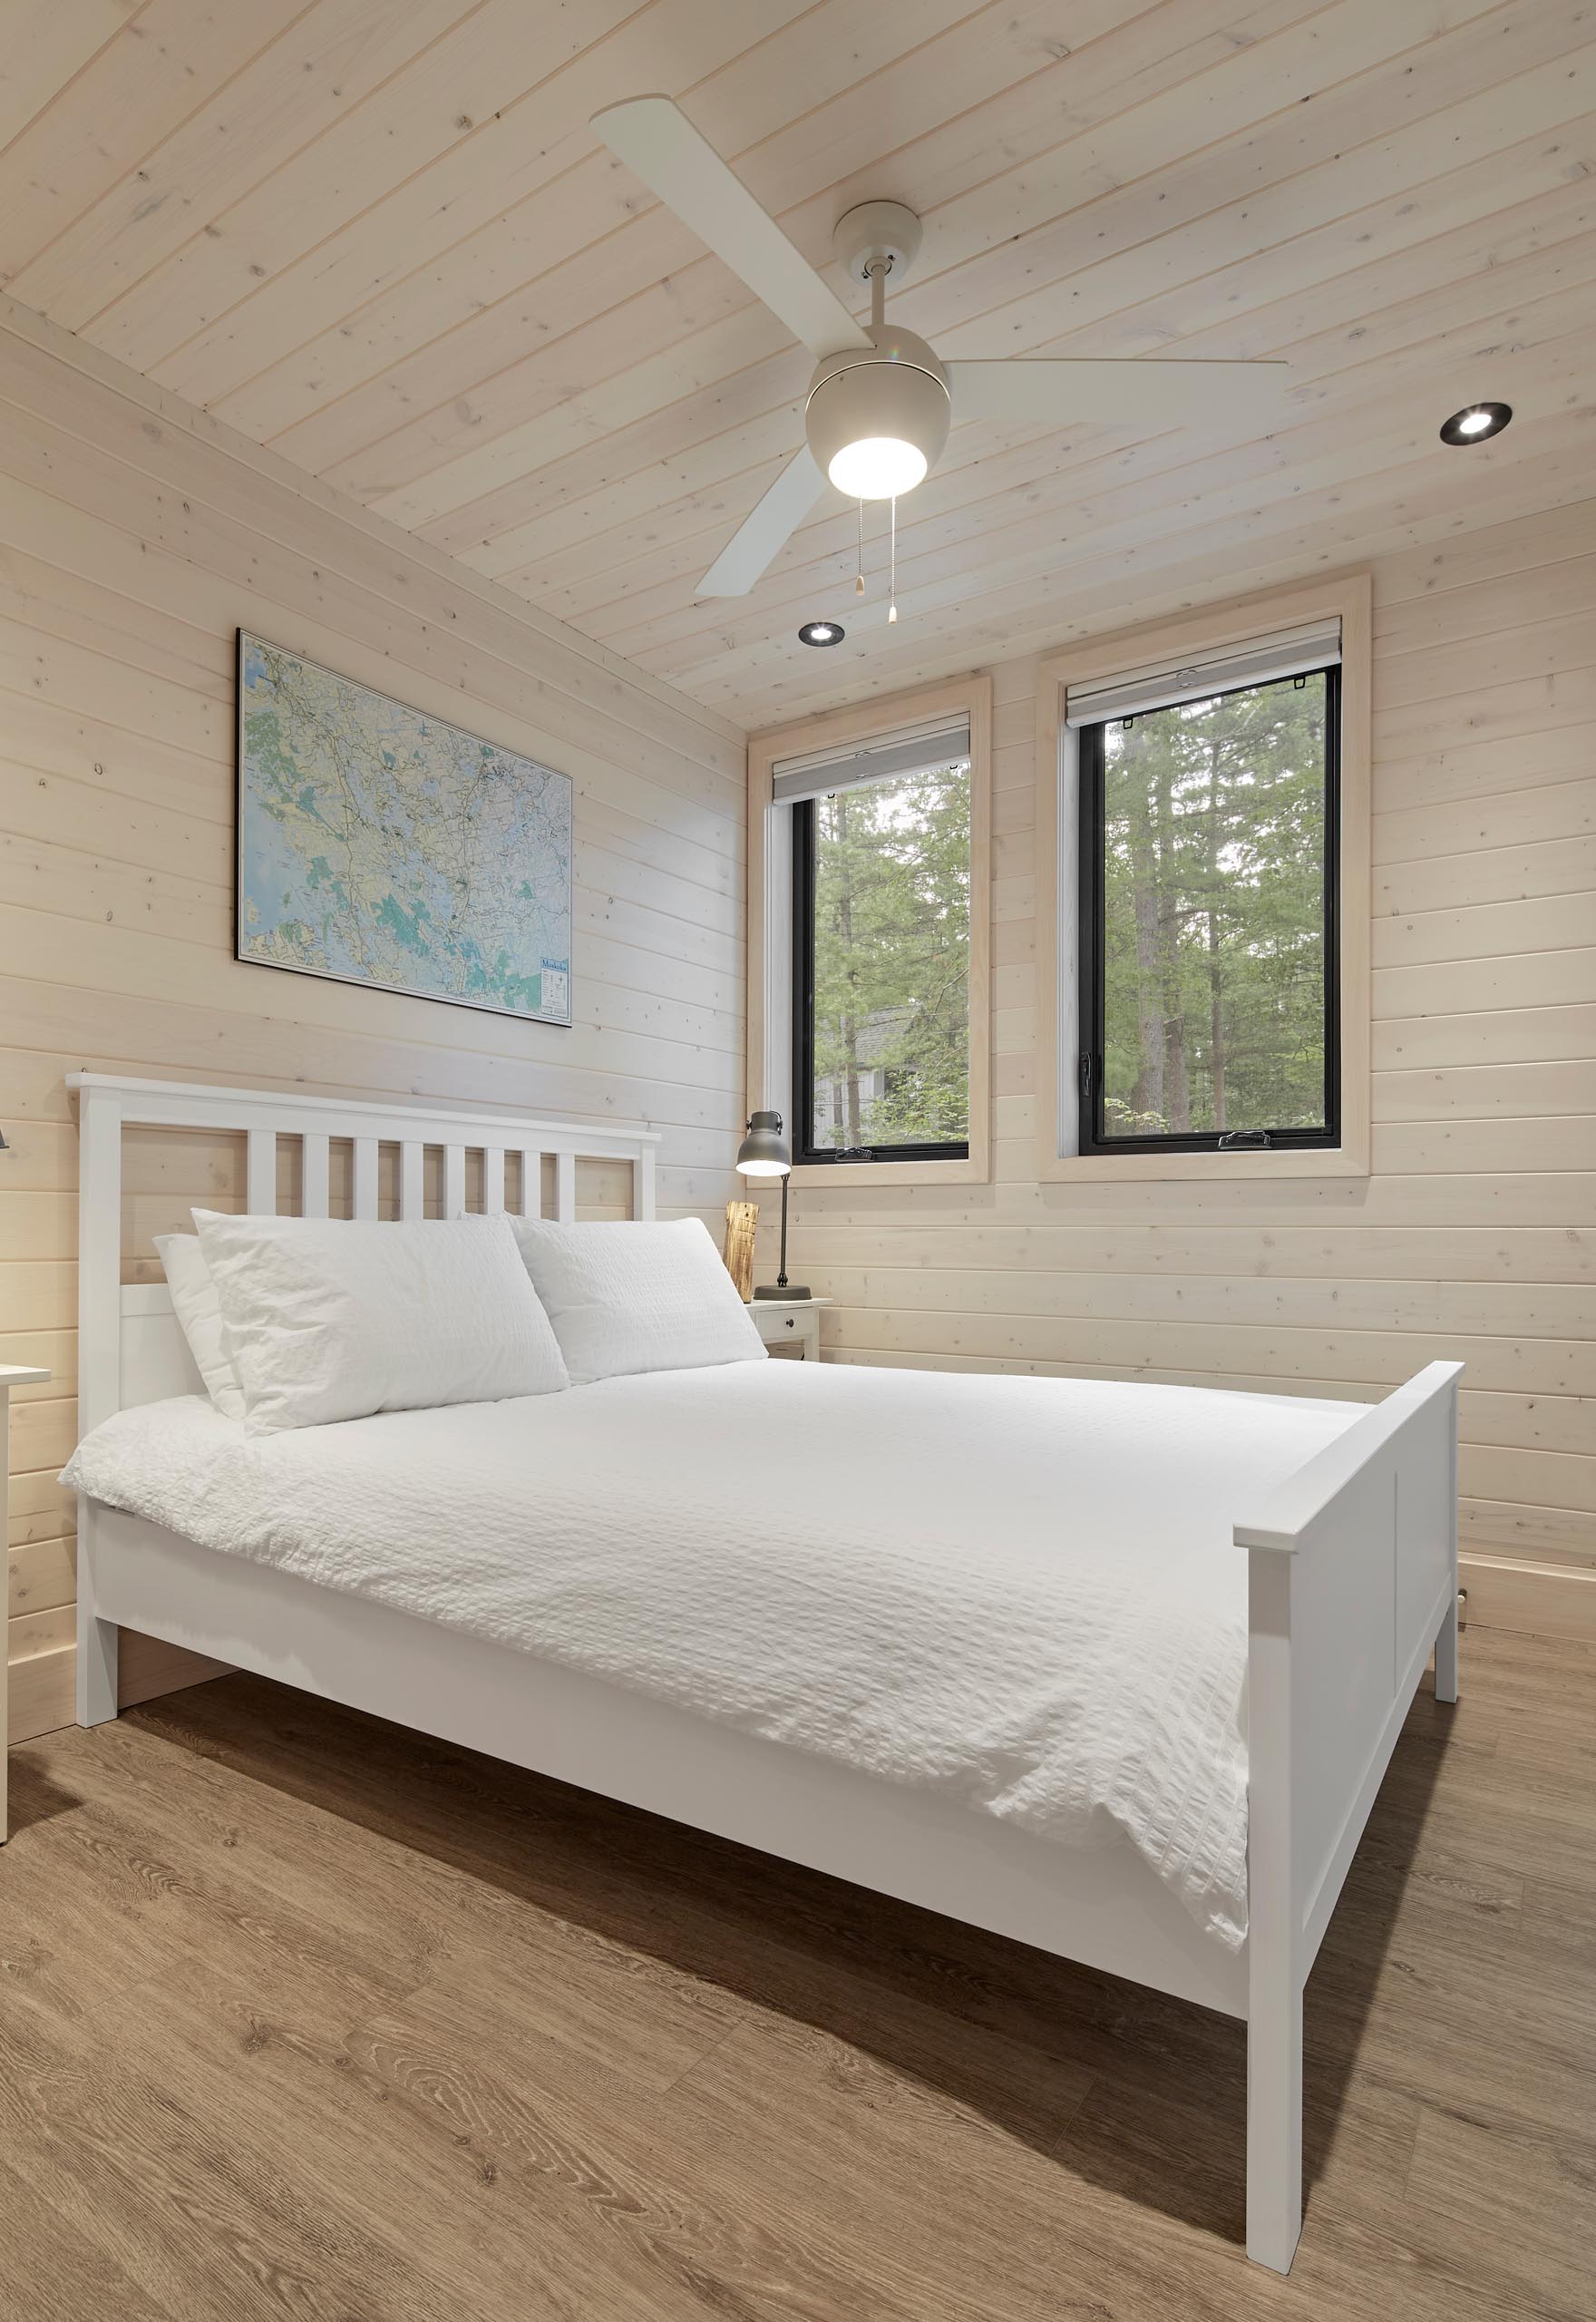 A modern cottage bedroom with light wood walls and ceiling.